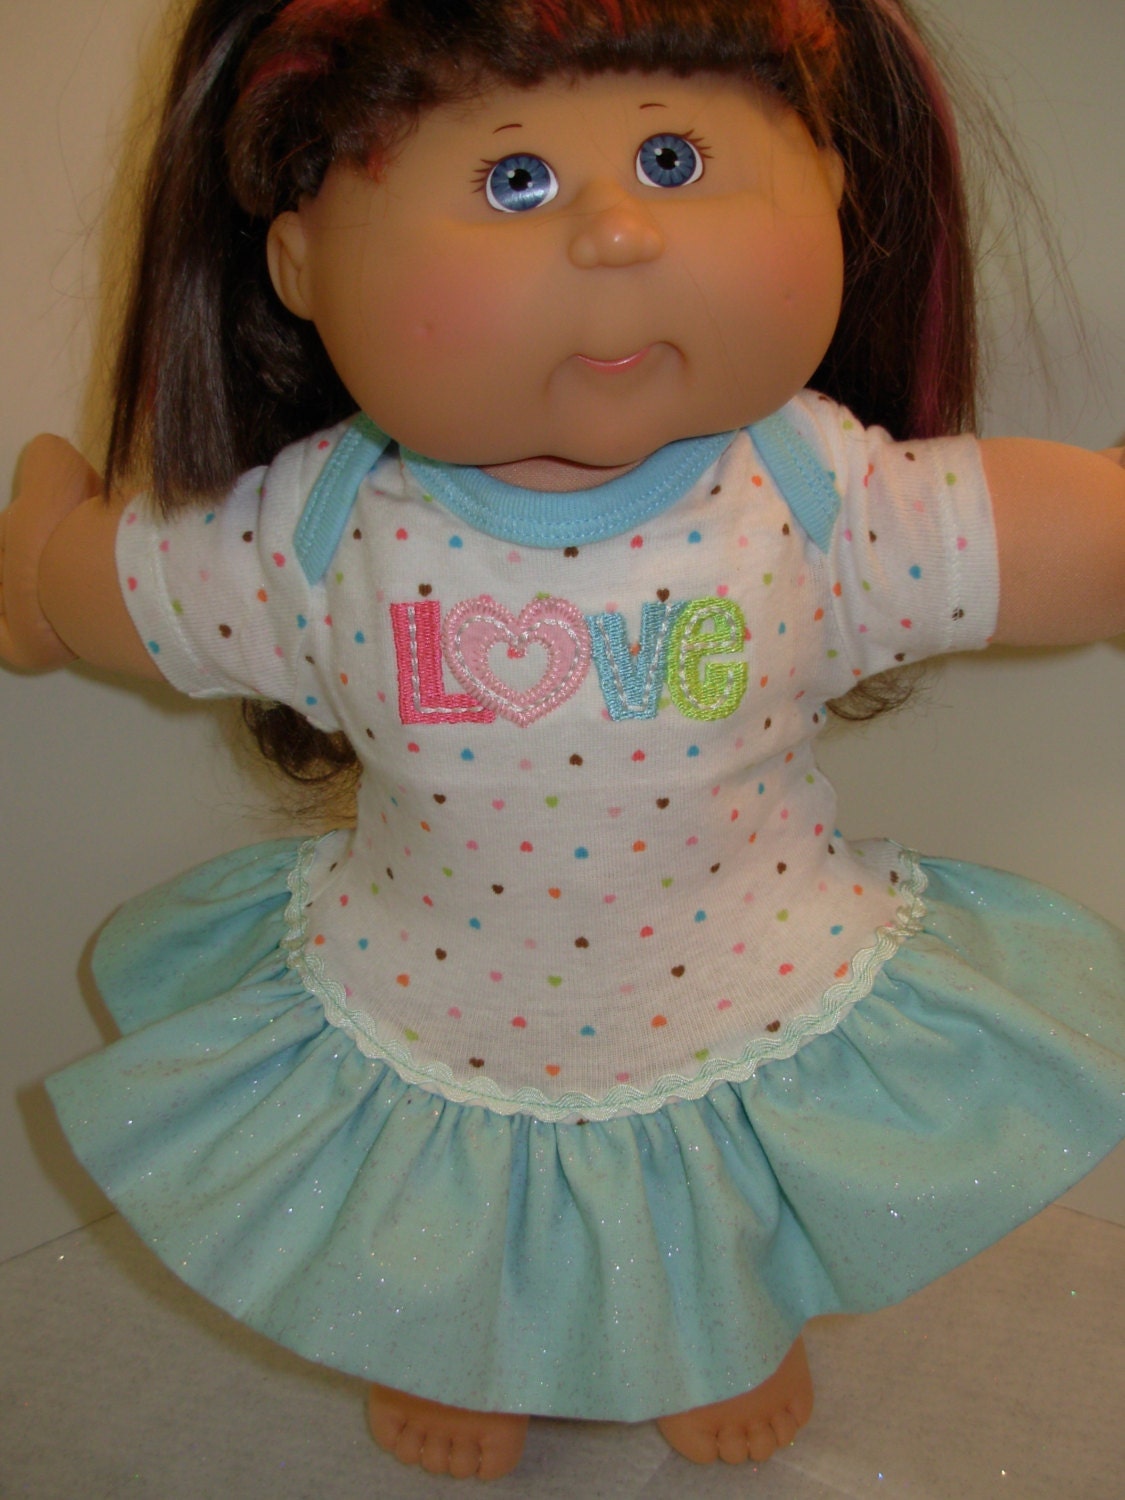 Cabbage Patch Doll Named Scarlett